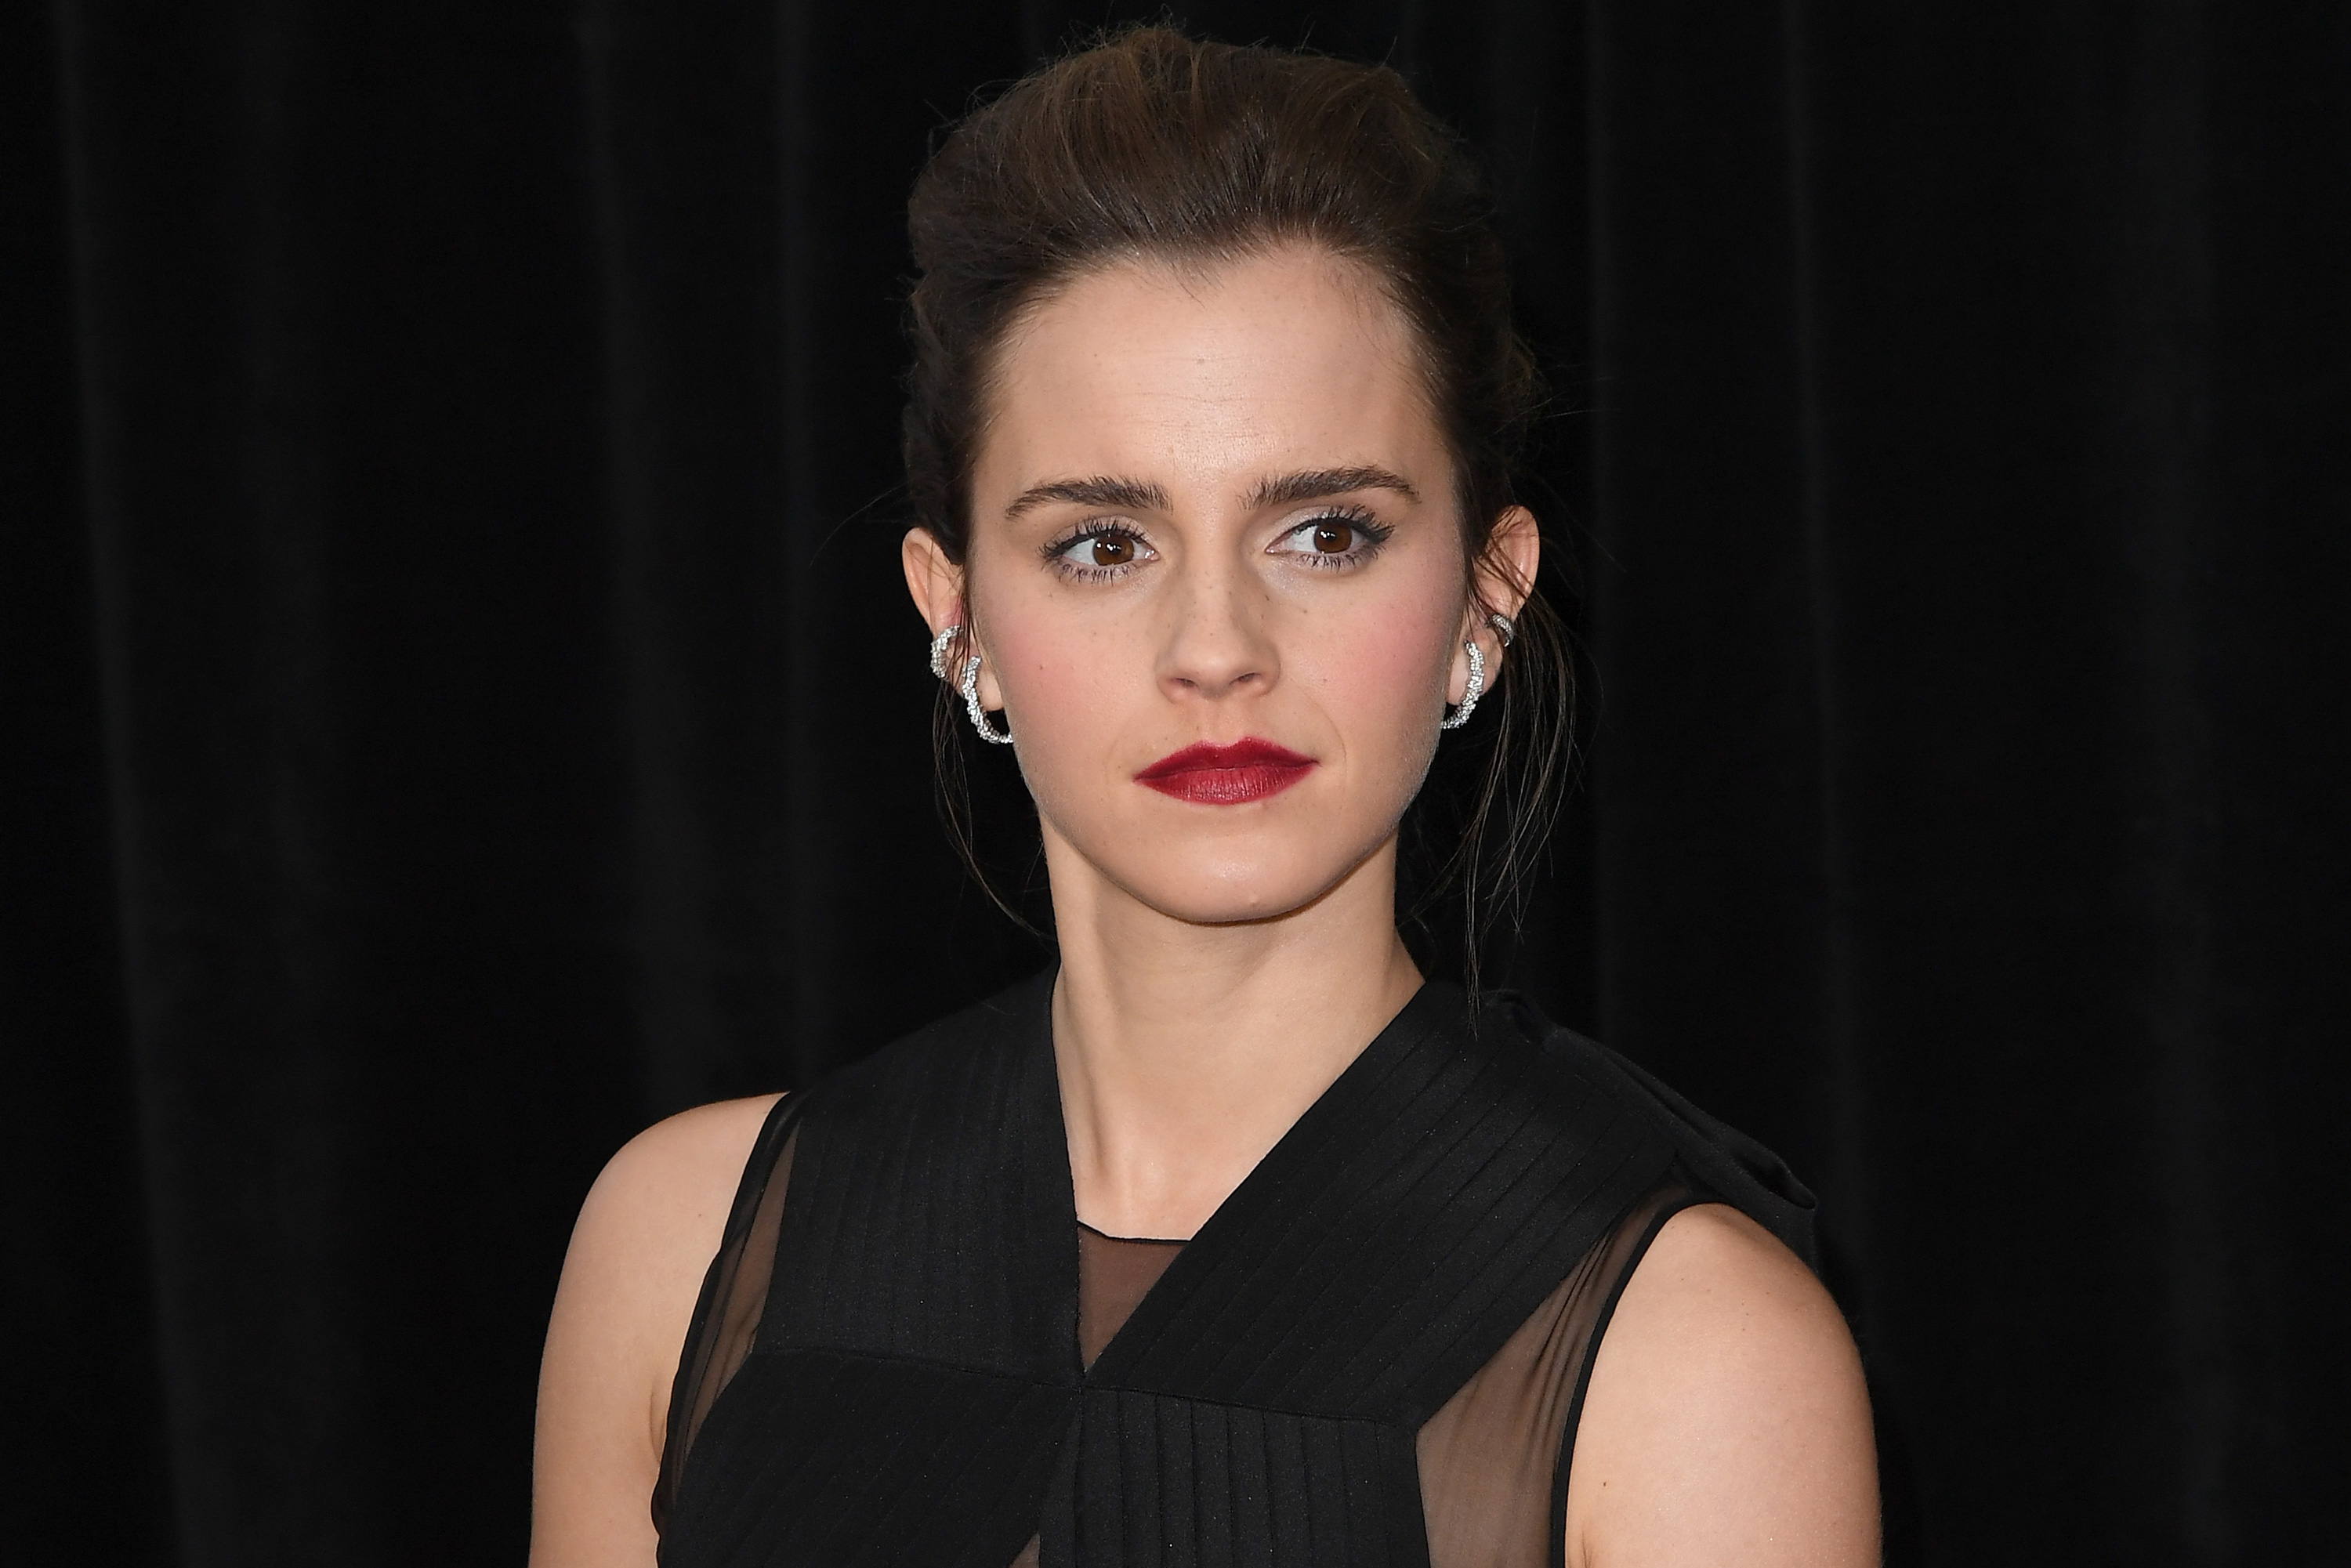 bailey sanders recommends Emma Watson Leaked Icloud Photos